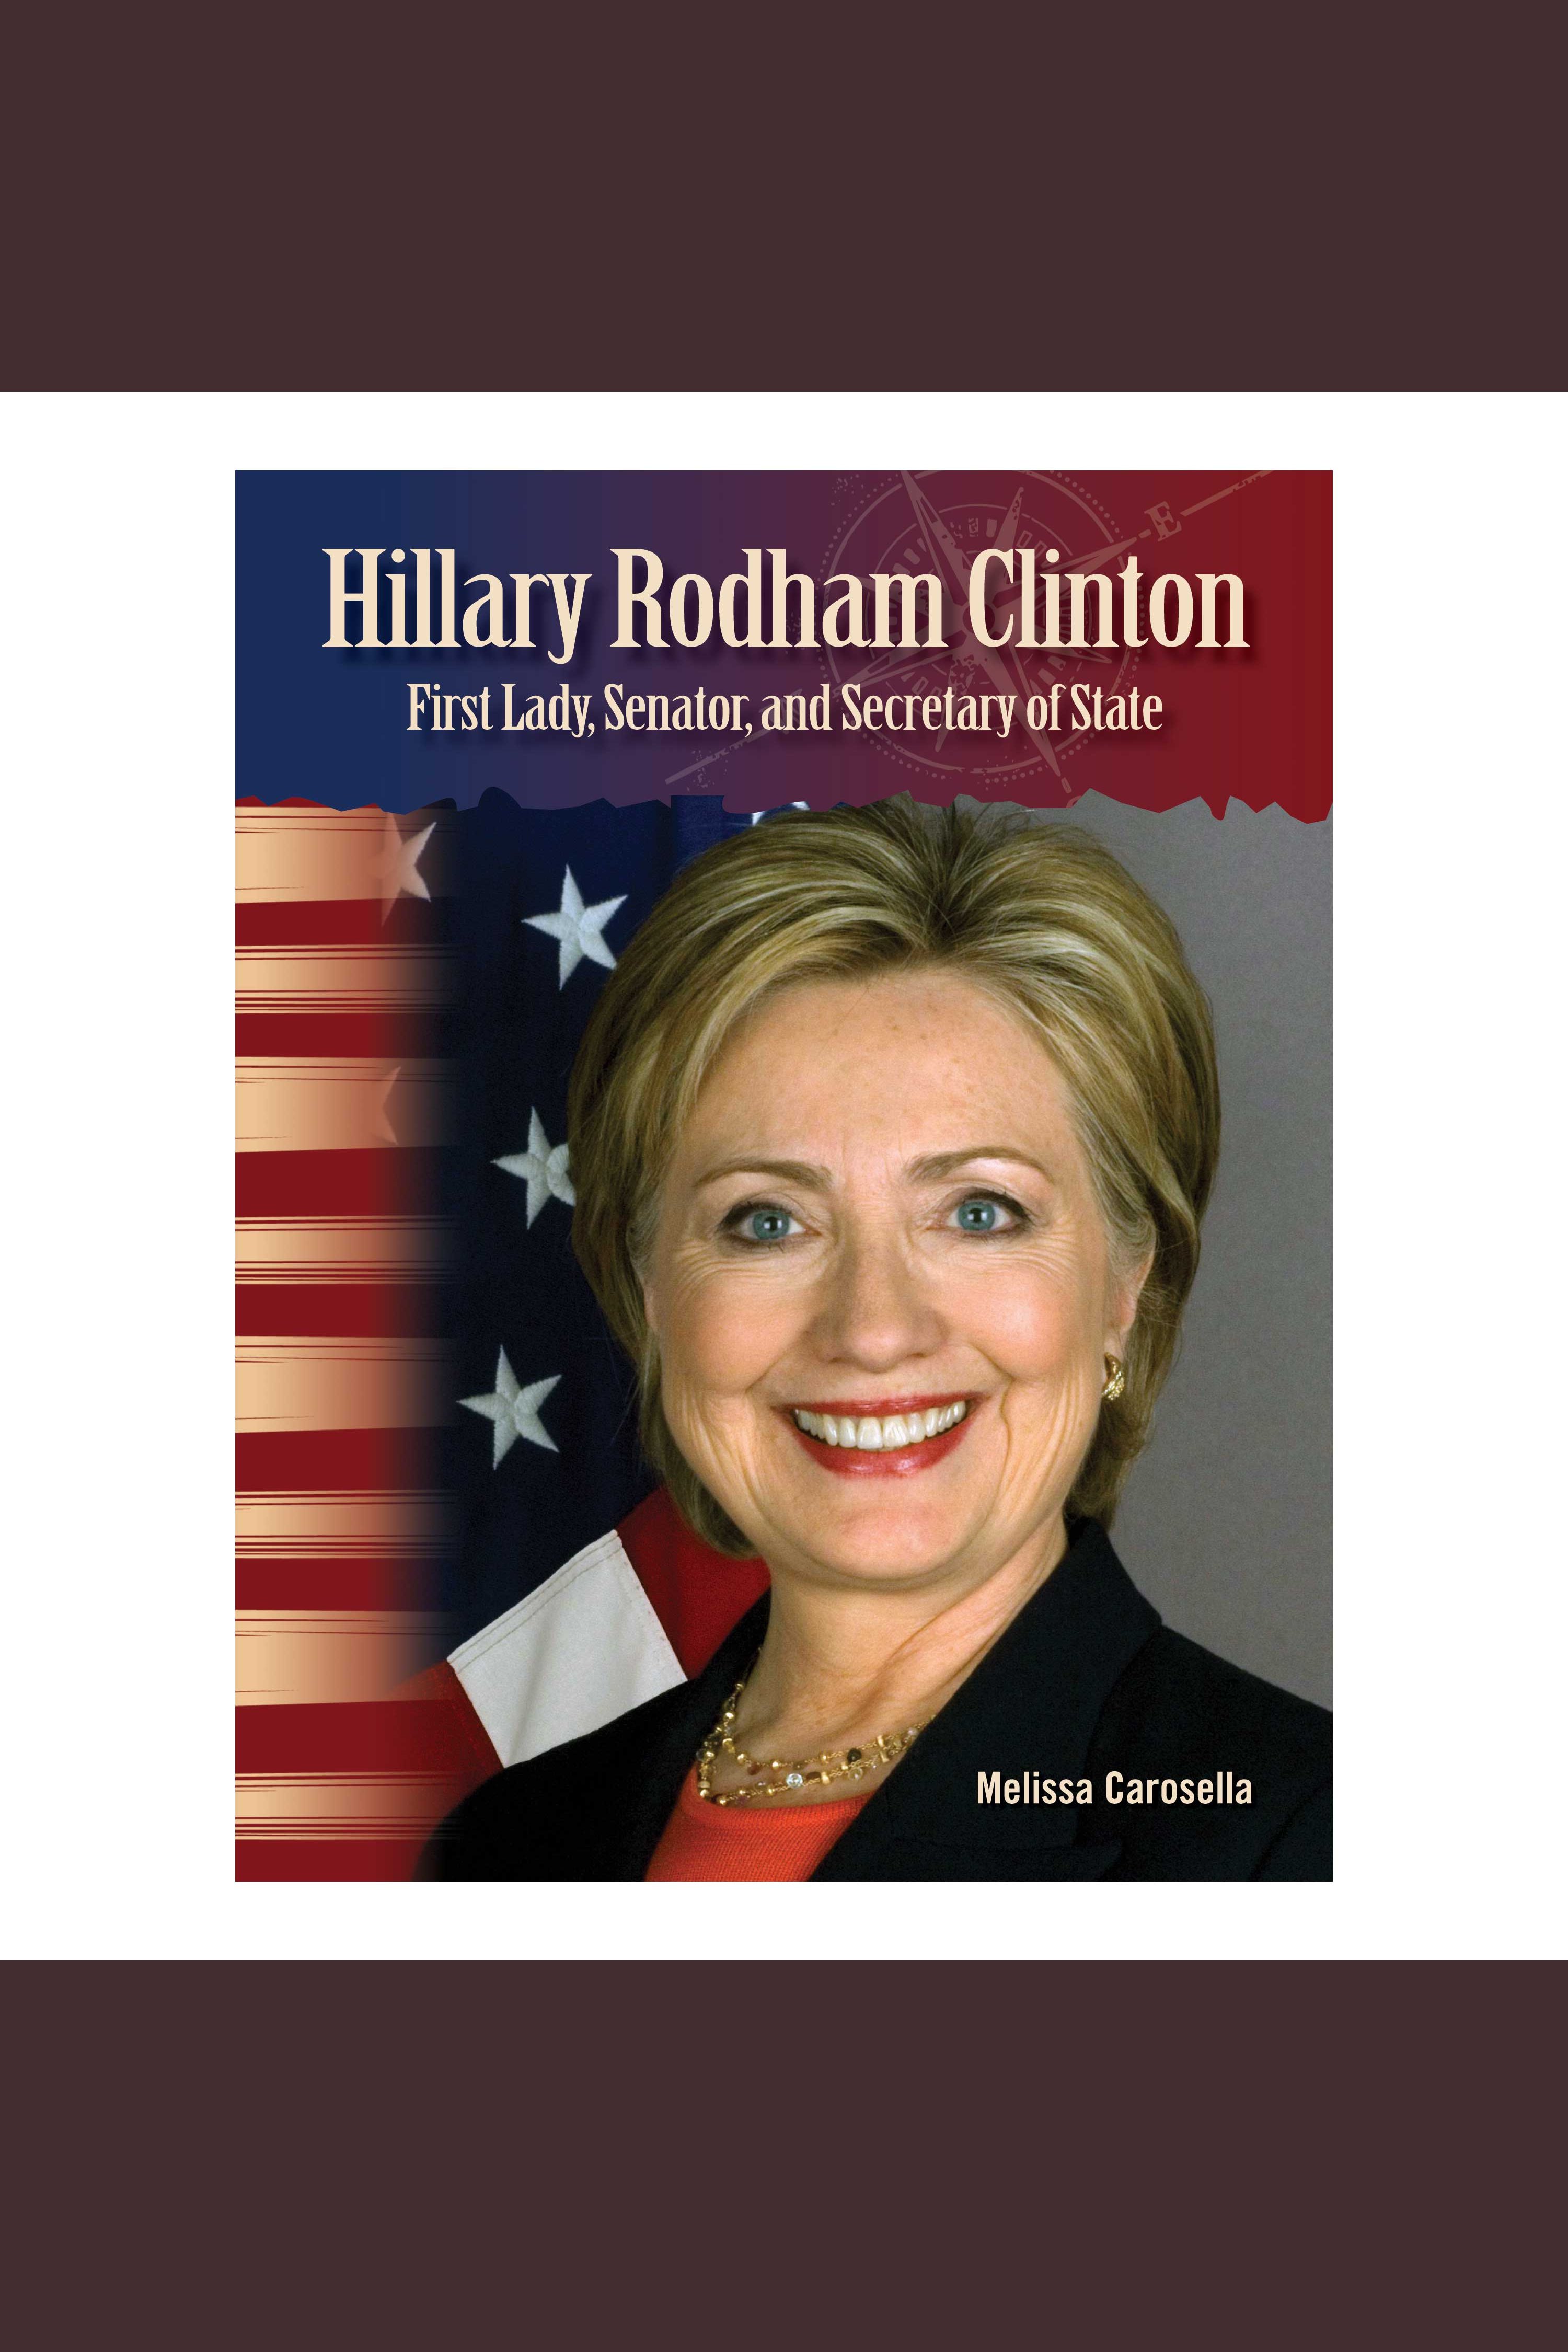 Hillary Rodham Clinton first lady, senator, and Secretary of State cover image